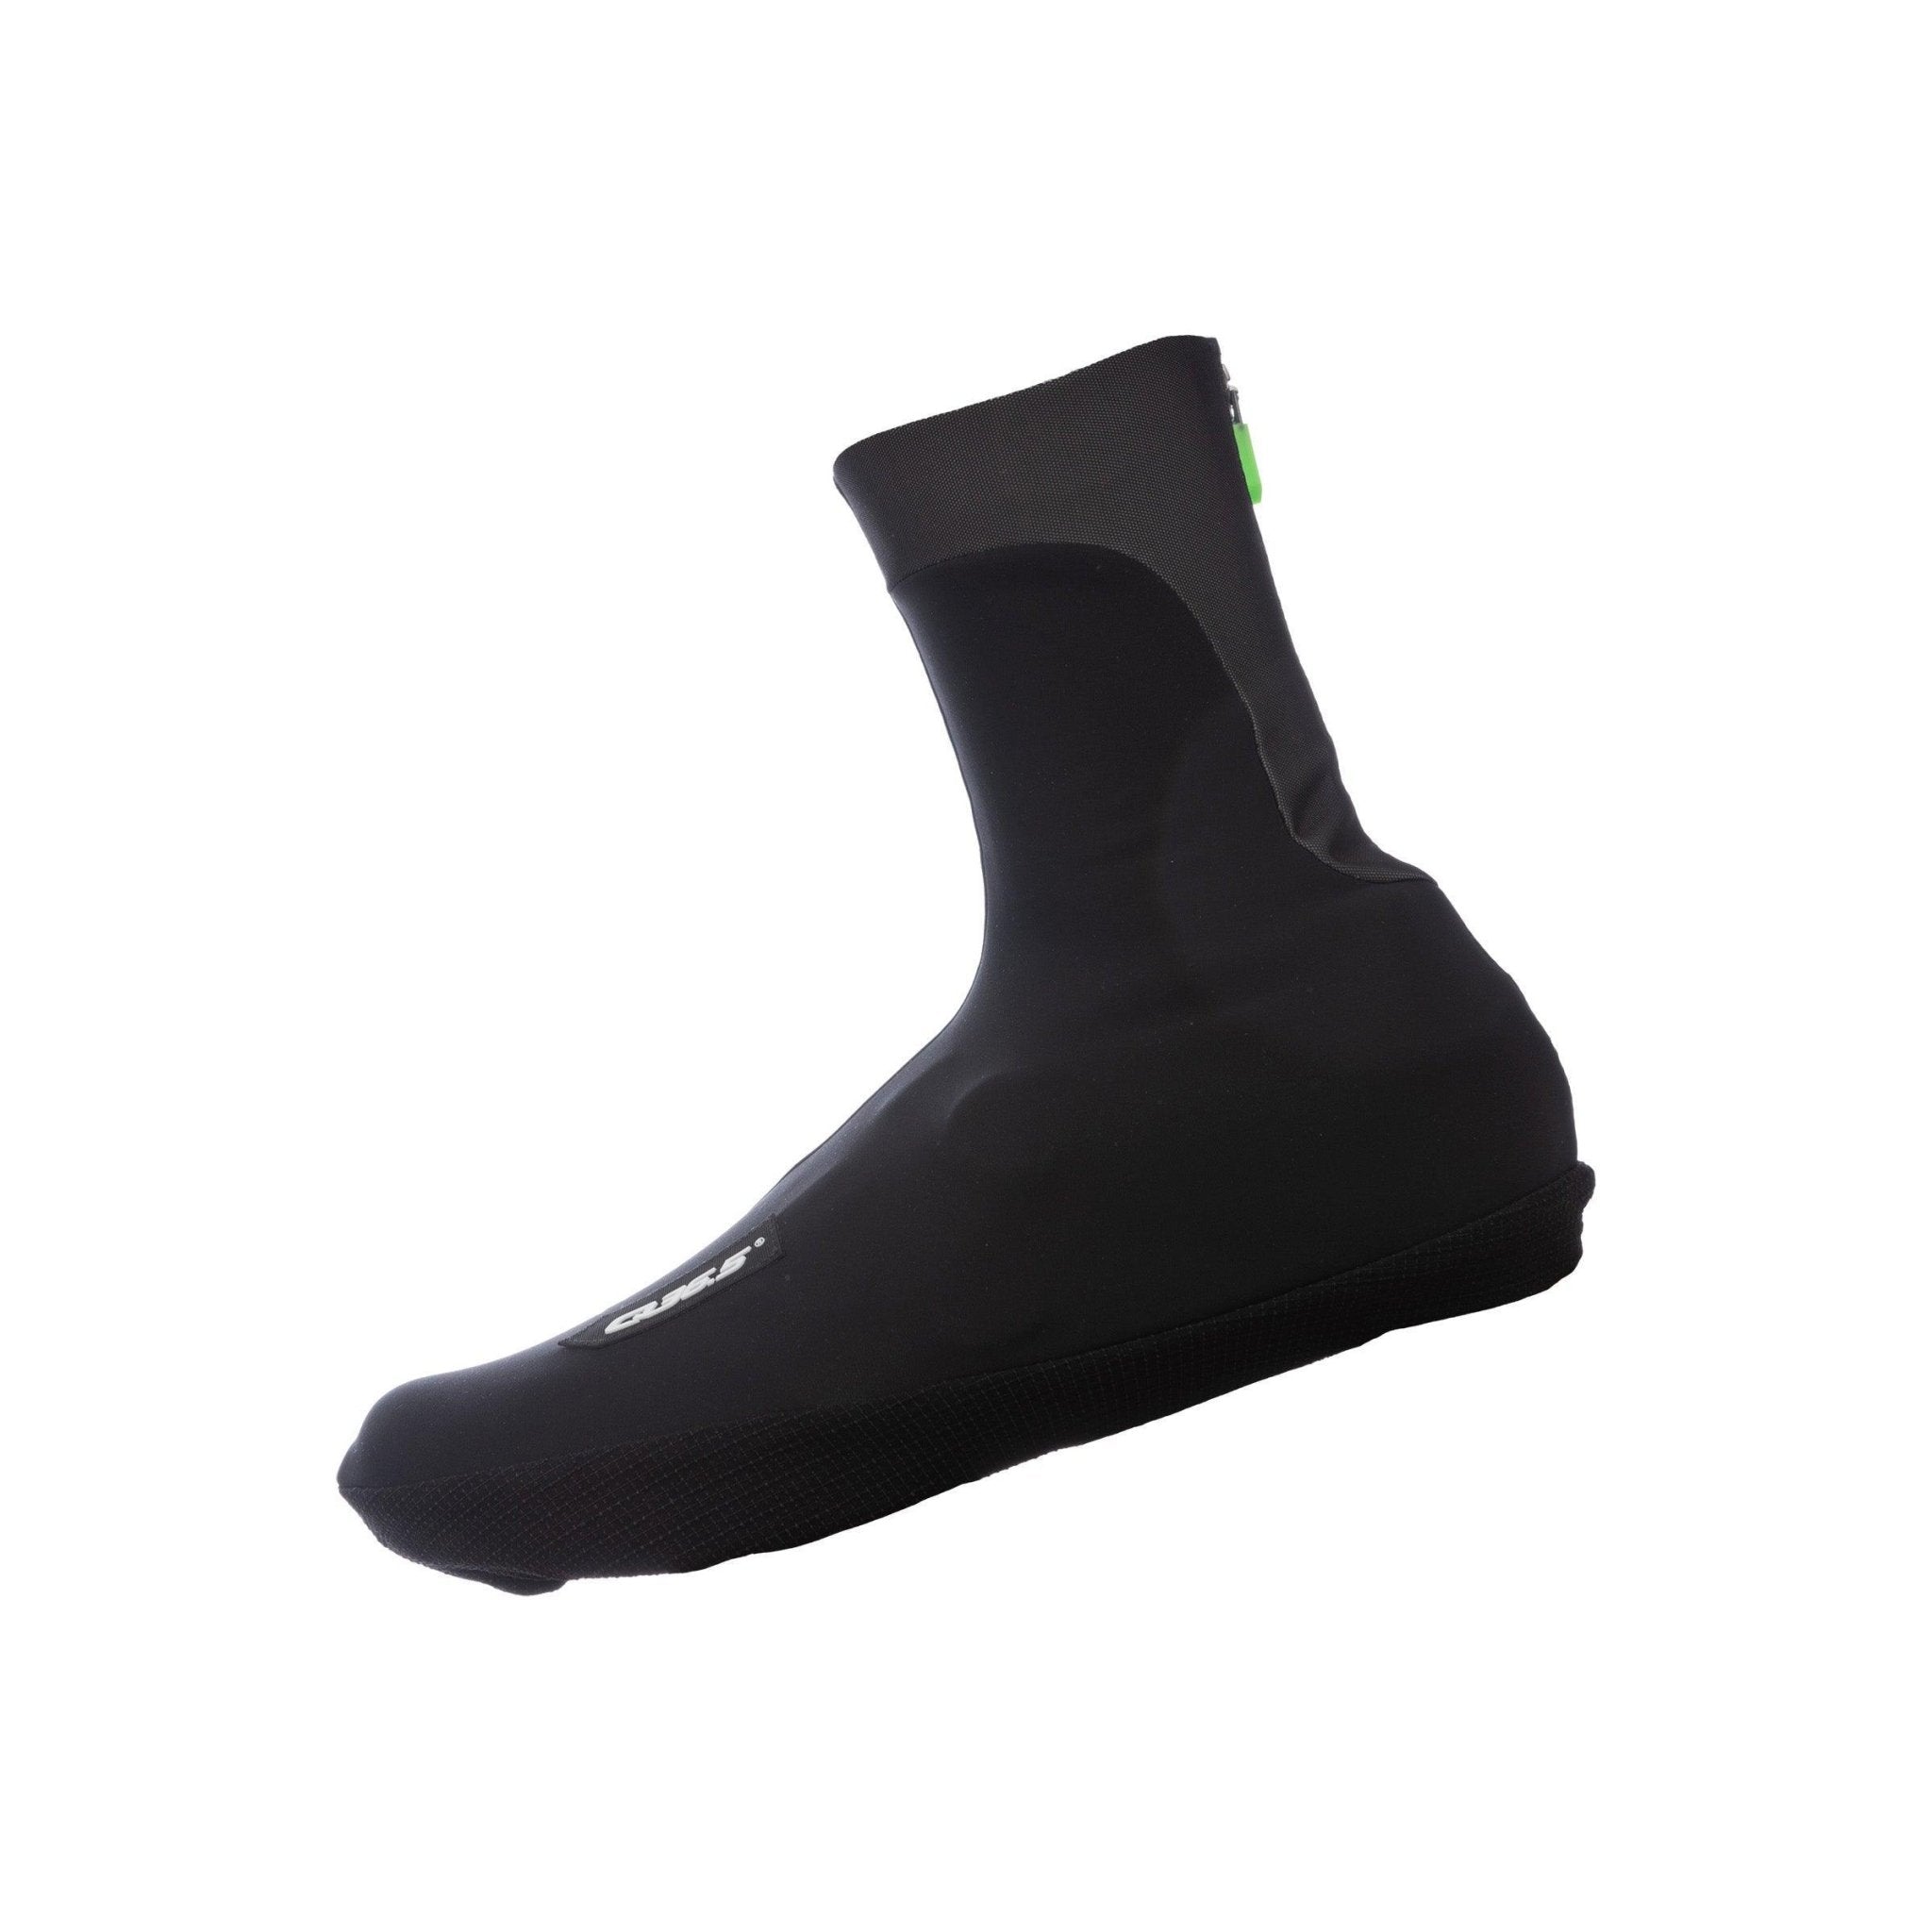 Termico Overshoes